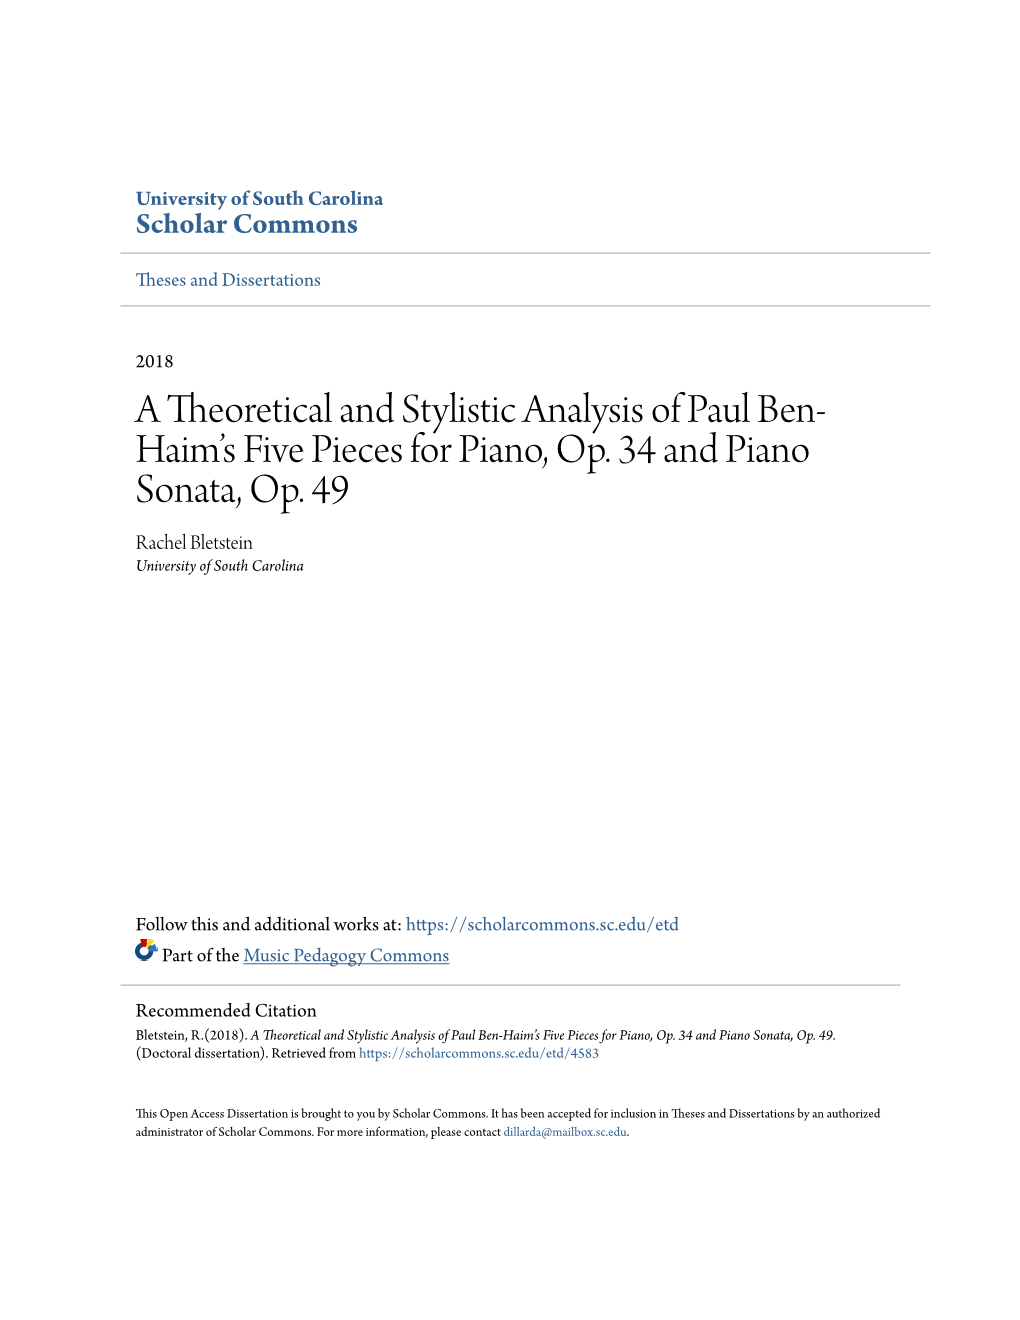 A Theoretical and Stylistic Analysis of Paul Ben-Haim's Five Pieces for Piano, Op. 34 and Piano Sonata, Op. 49